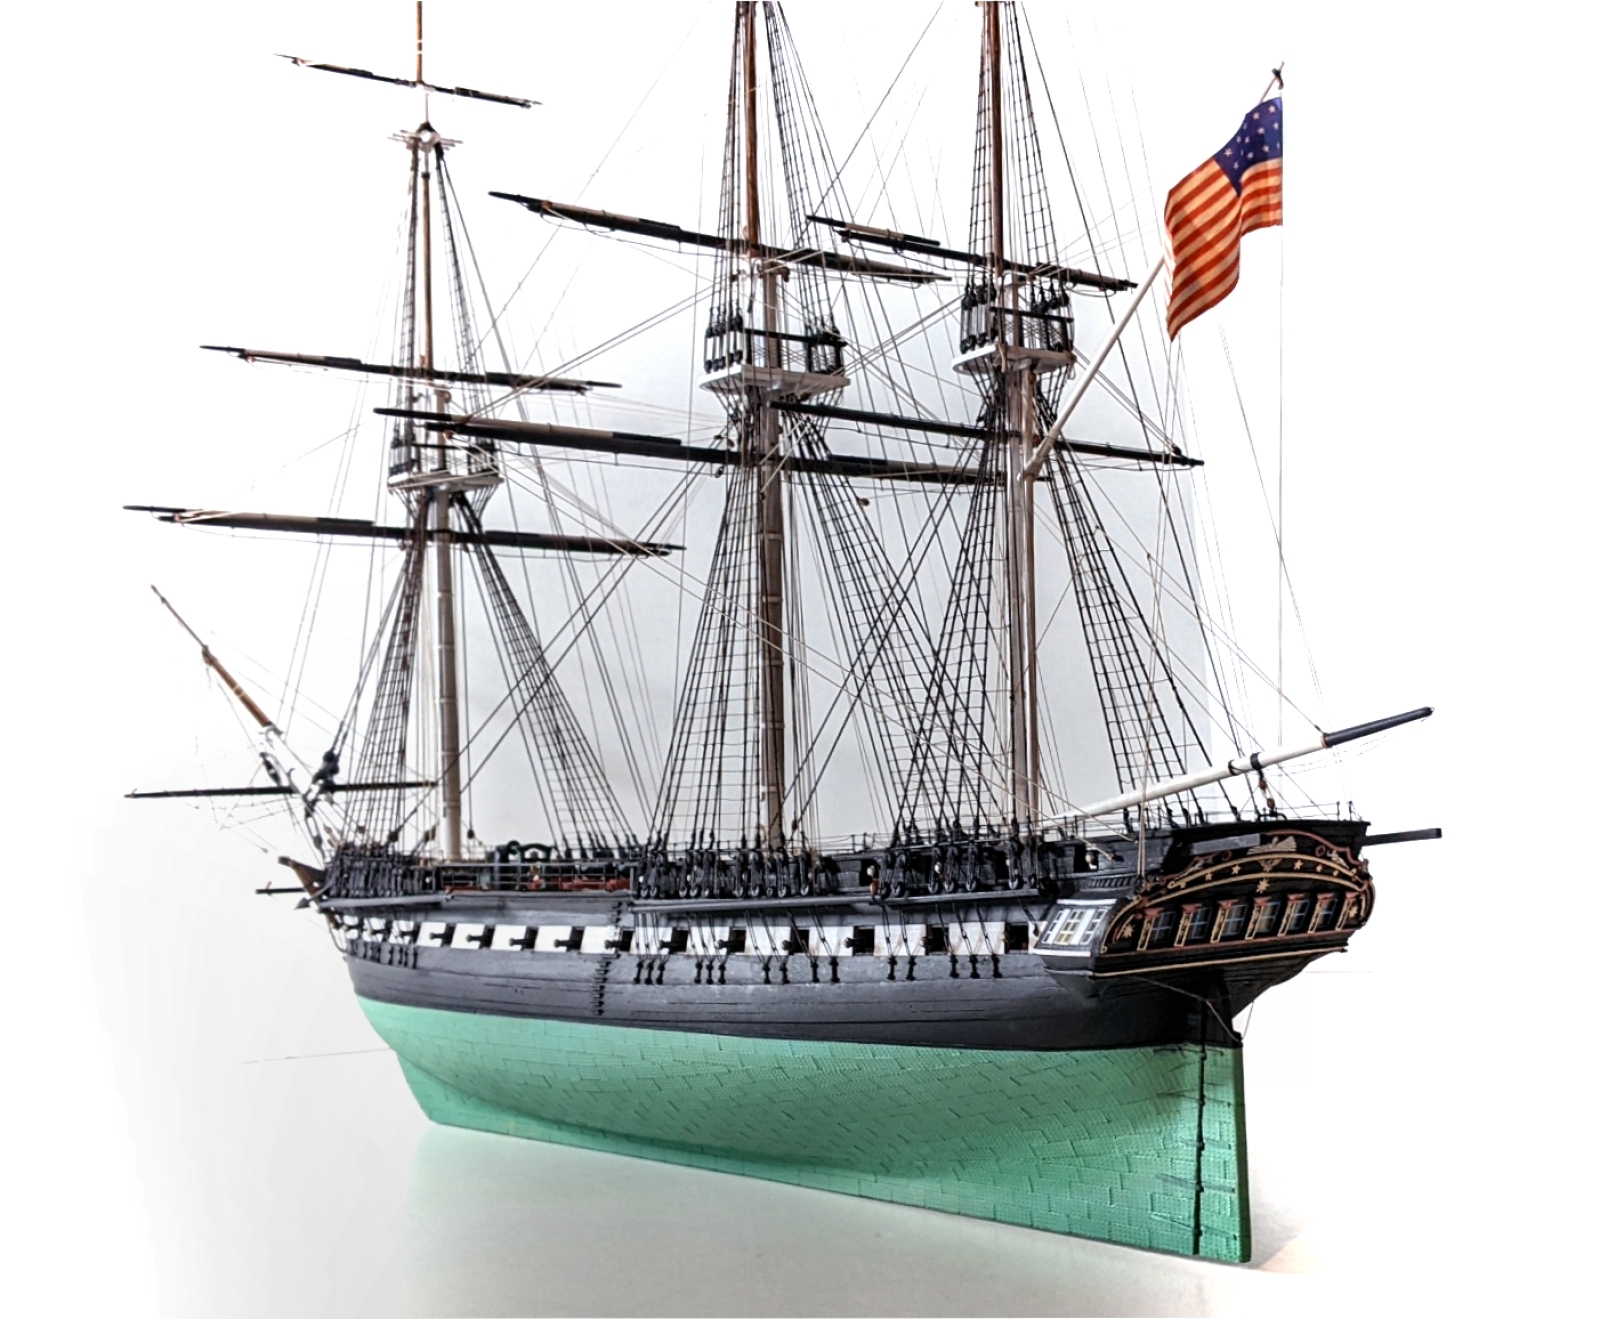 Image of completed Constitution circa 1812 model